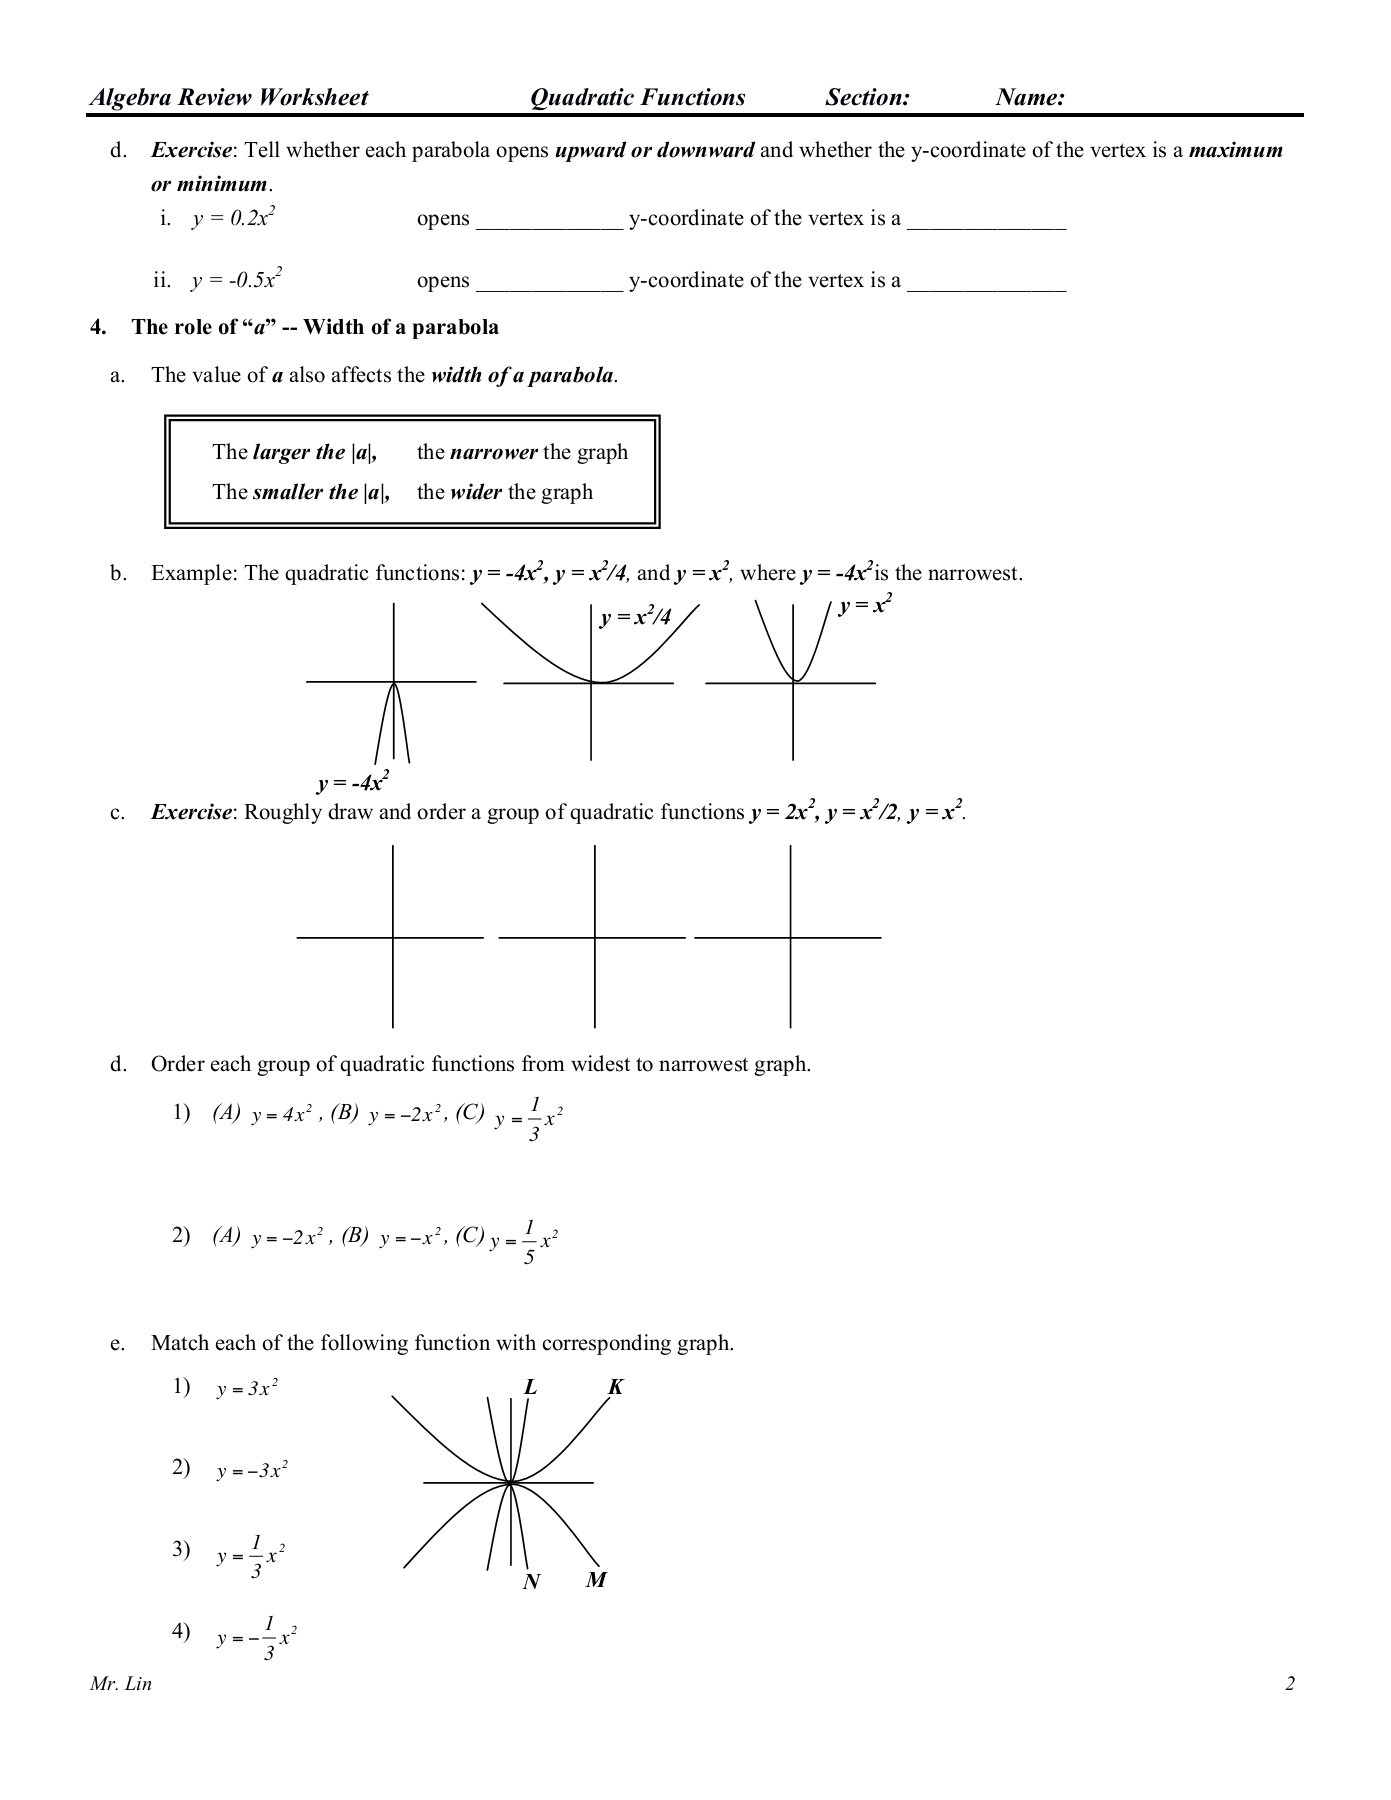 Quadratic Functions Worksheet with Answers Algebra Worksheet 09 Qudratic Functions Pages 1 5 Text